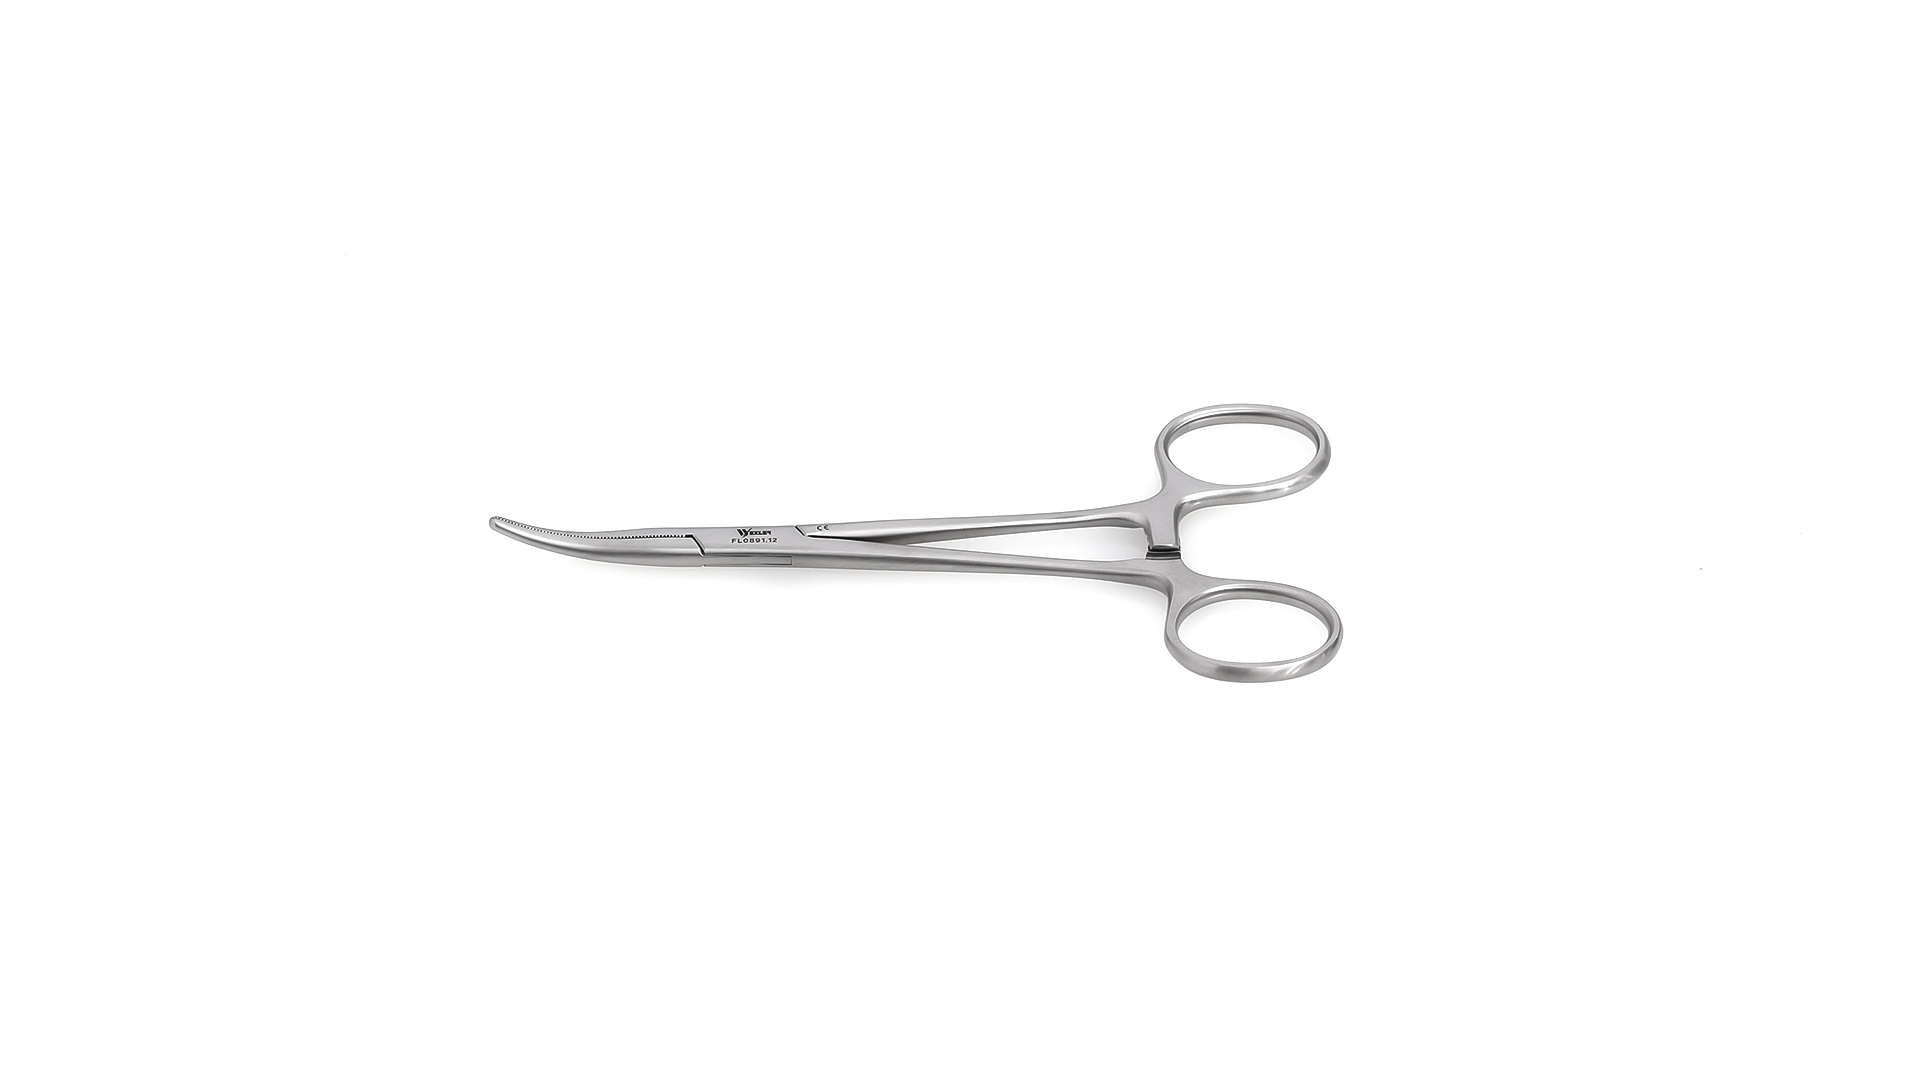 Crile Forceps - Curved serrated jaws